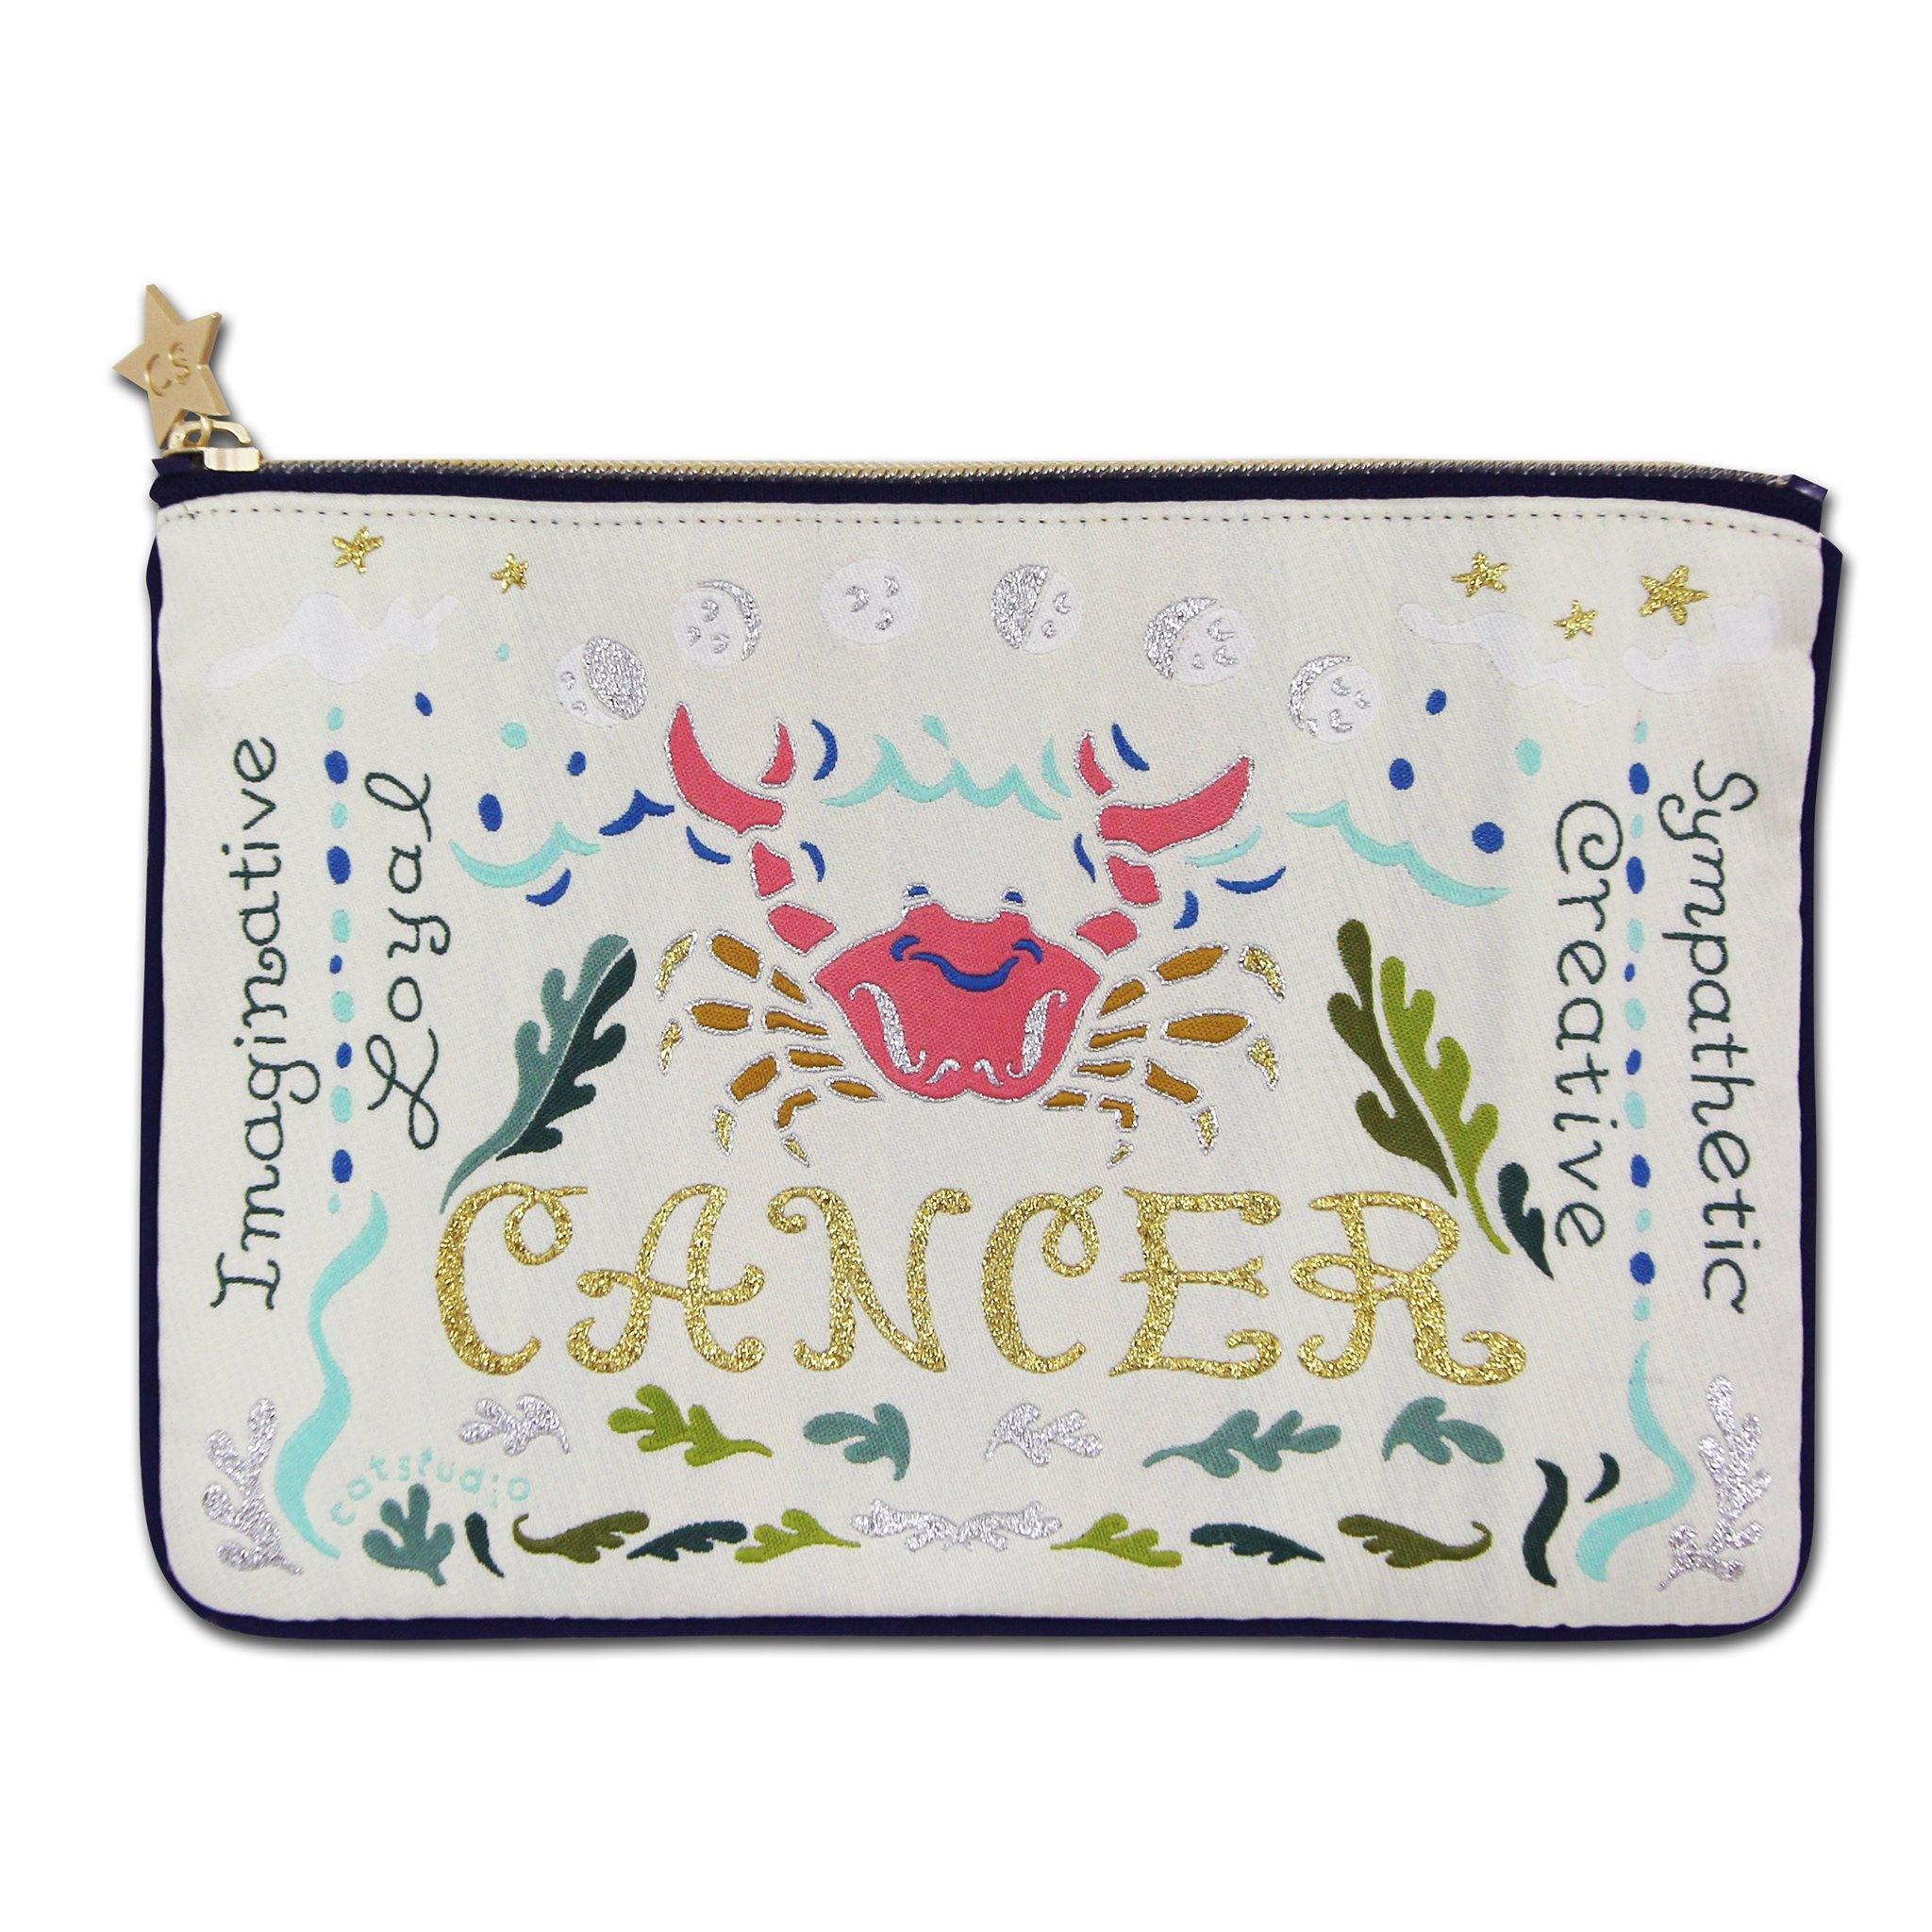 Cancer Astrology Zip Pouch